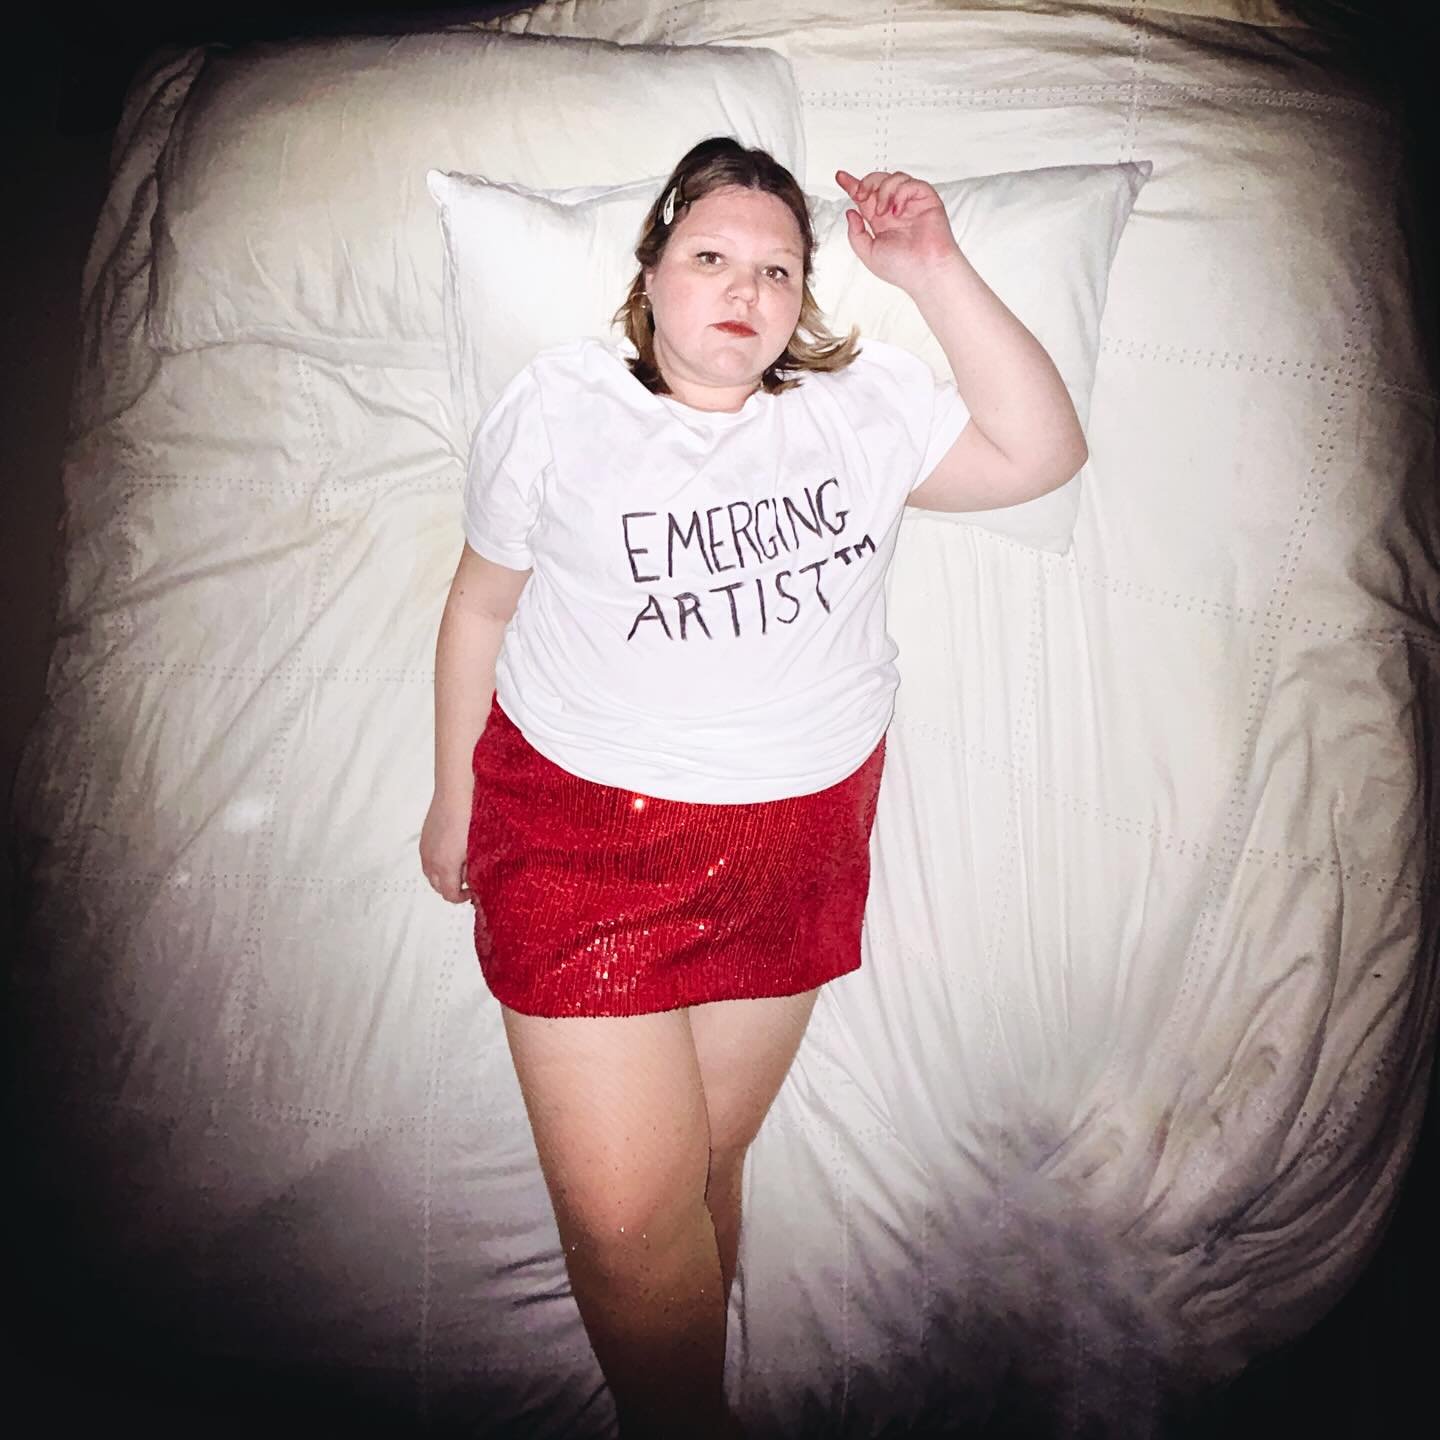 I never got to wear my afterparty outfit after my Winnipeg show because I skidaddled out of there pretty quick to go to bed, so I thought I&rsquo;d model it for you from my beloved bed. 

I am emerging. You are emerging. We are always emerging. Emerg